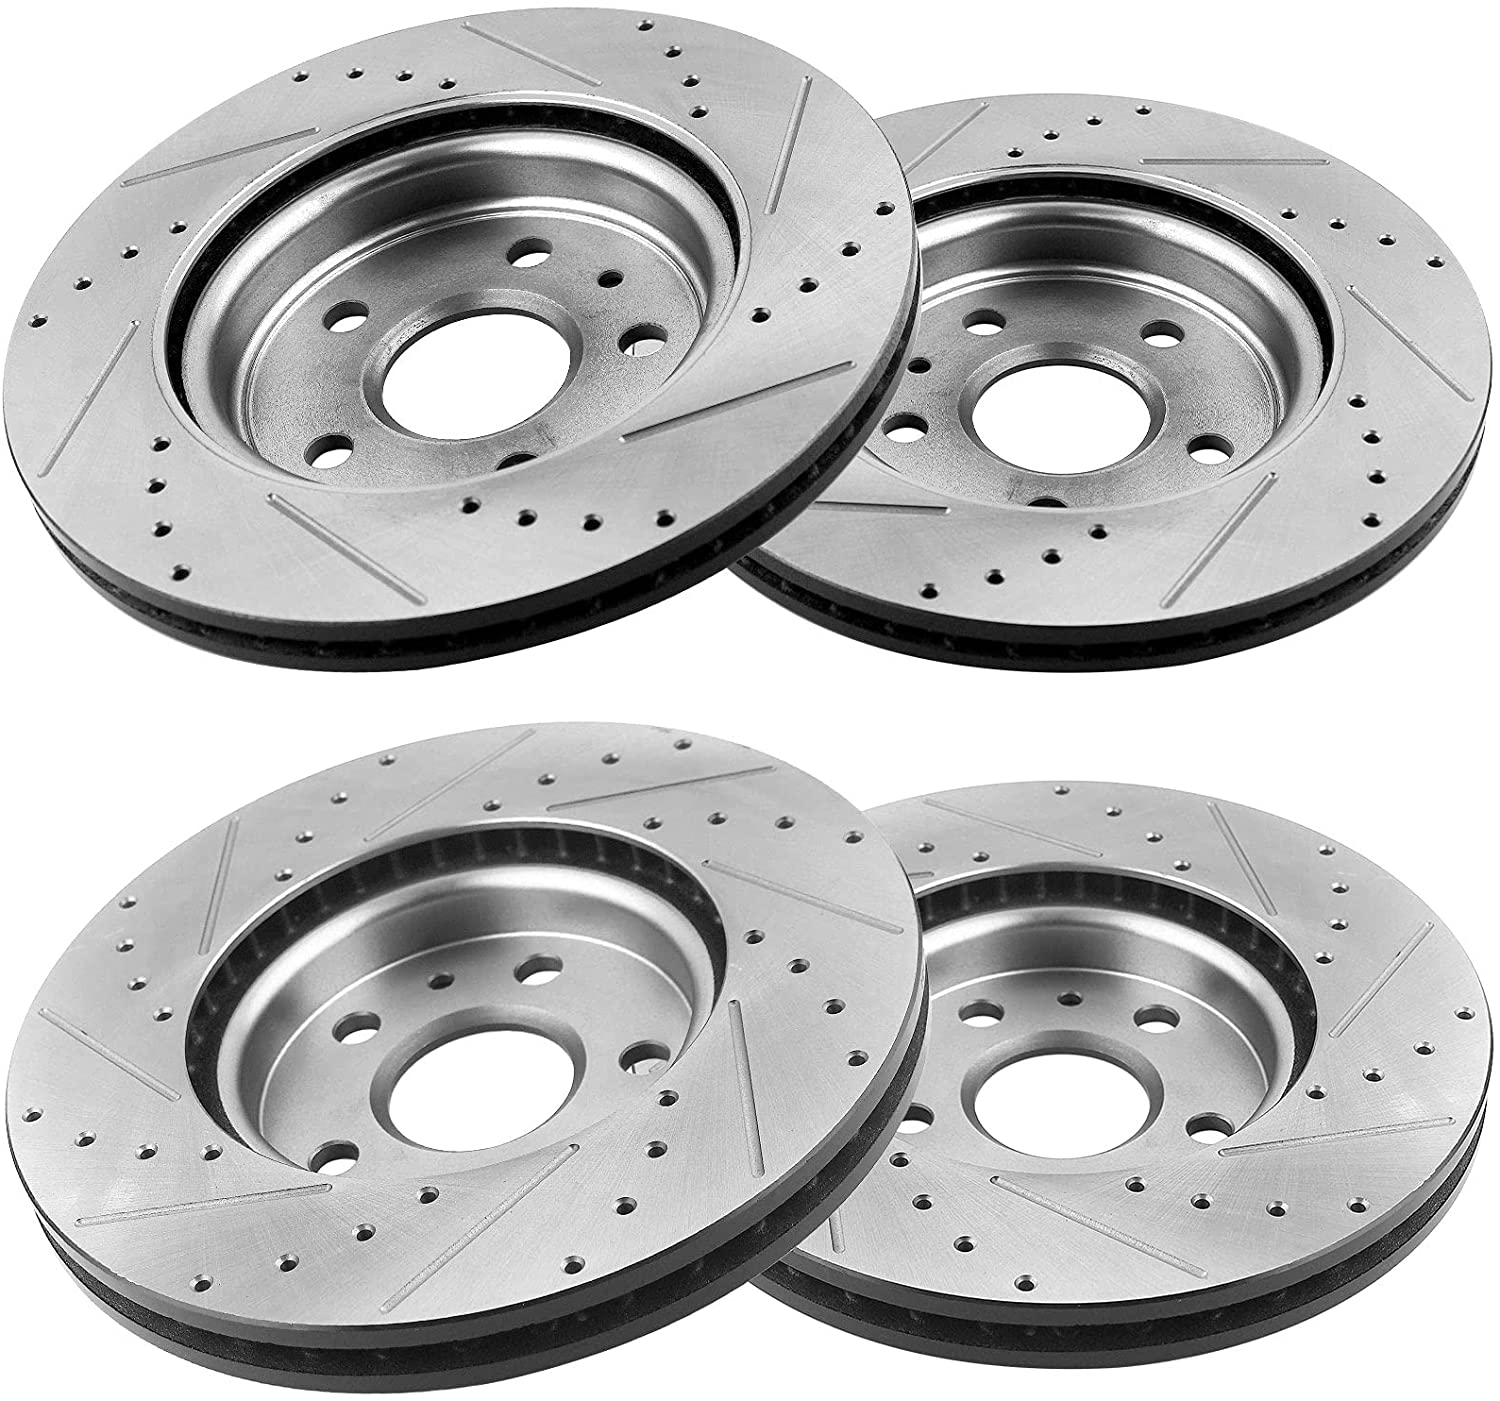 Front & Rear Drilled & Slotted Disc Brake Rotors + Ceramic Pads + Cleaner & Fluid Fits for 2010 2011 2012 2013 2014 2015 Chevy Camaro MotorbyMotor